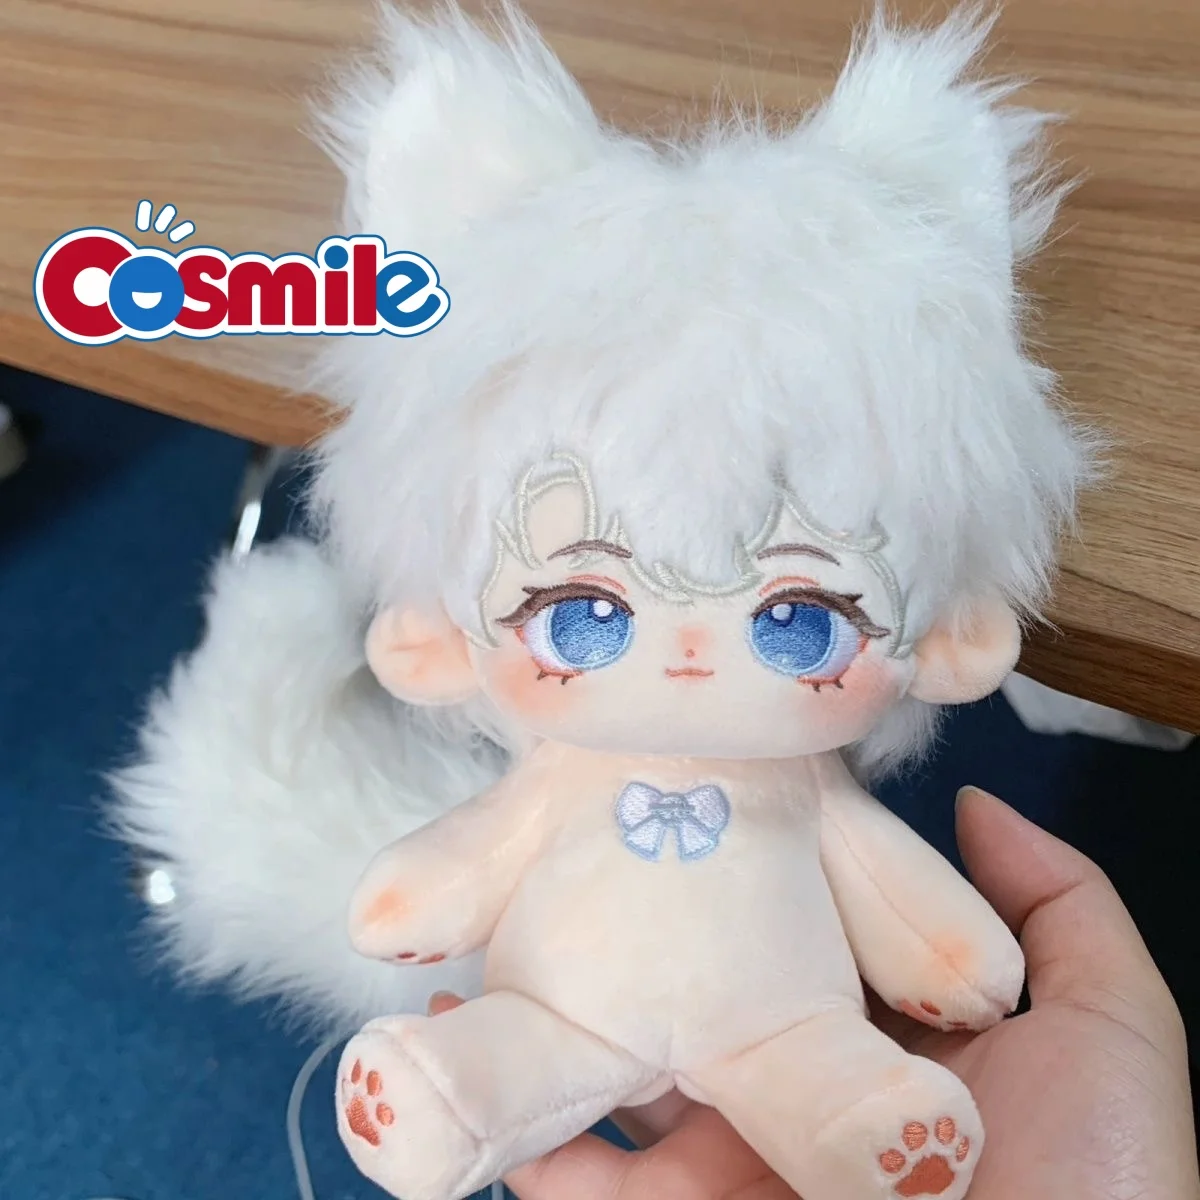 

Cosmile Monster Handsome Boy White 20cm Plush Doll Body Toy Cosplay Anime Accessories Cute PDD